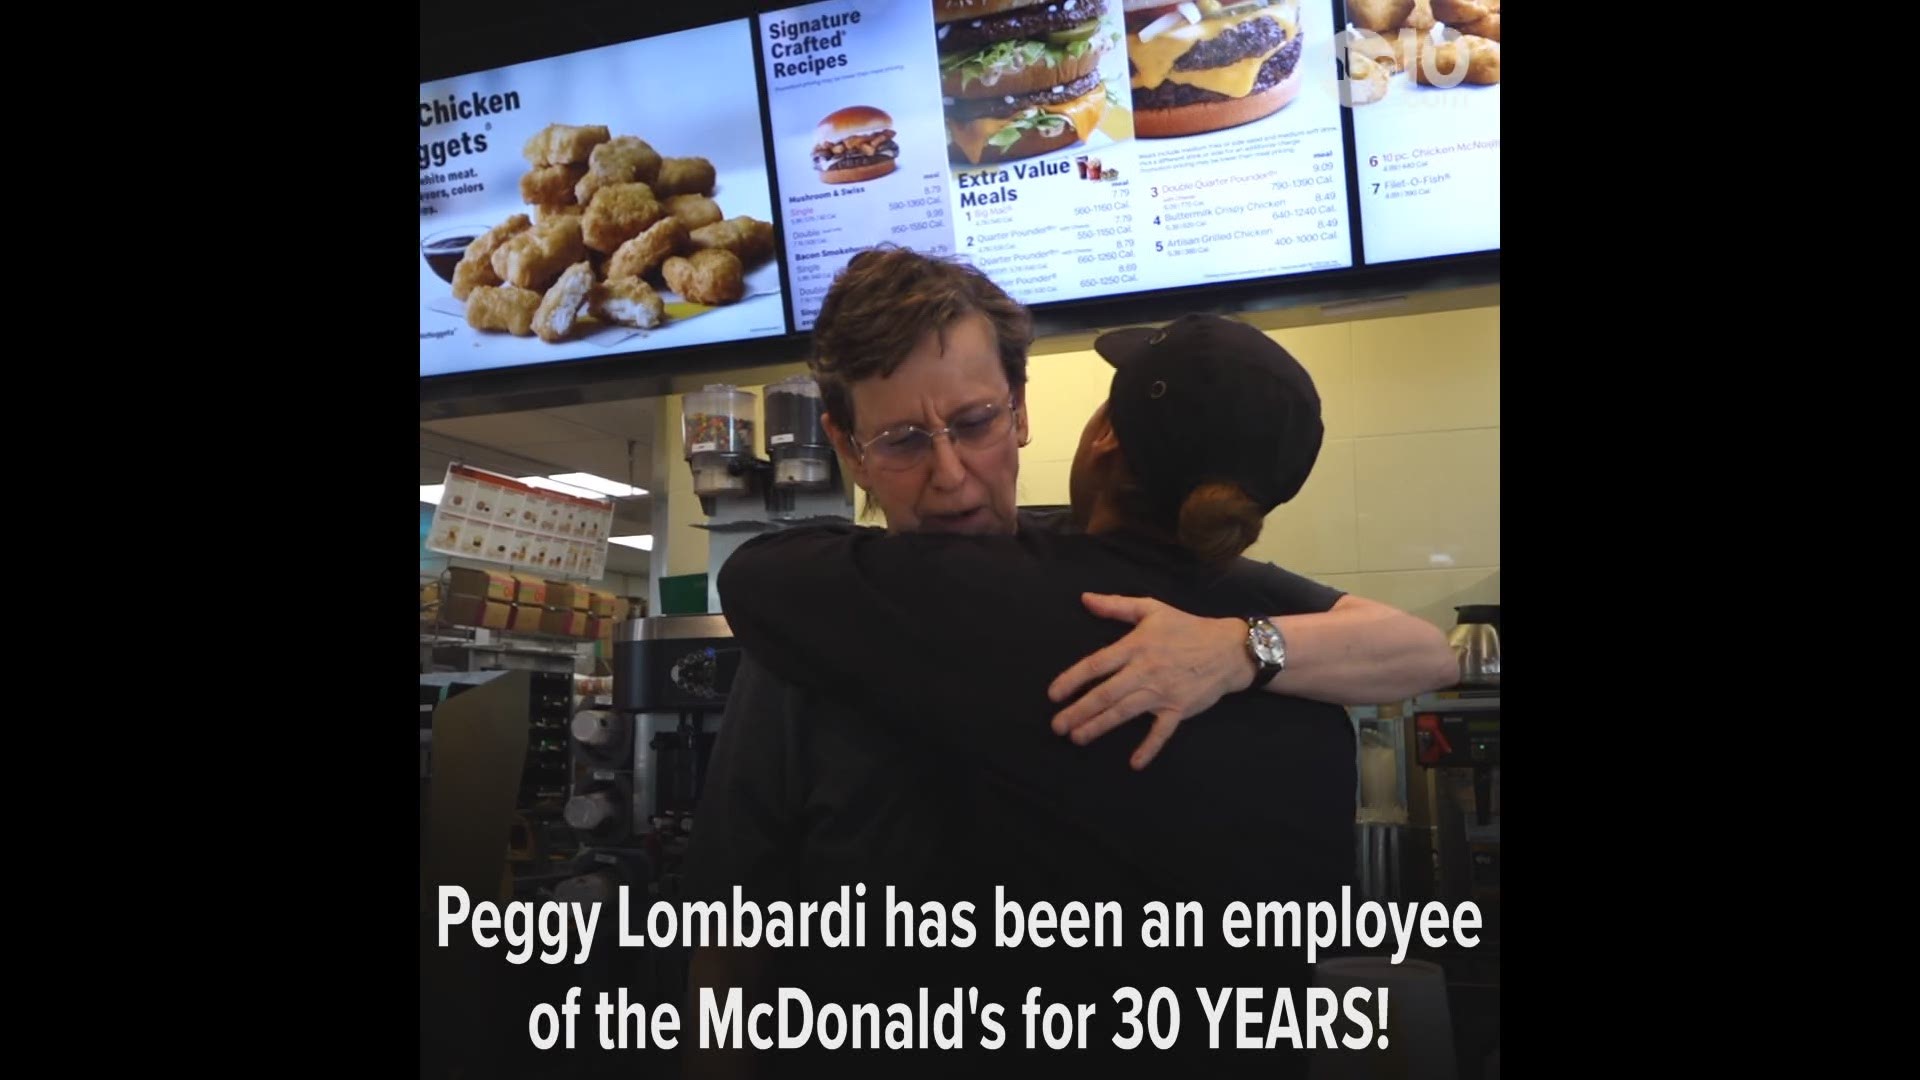 Over the years friends and customers have asked Peggy Lombardi when she will retire, but it doesn't seem she wants to just yet. In her own words, "Why should I? I love it here and this is where my friends are!"